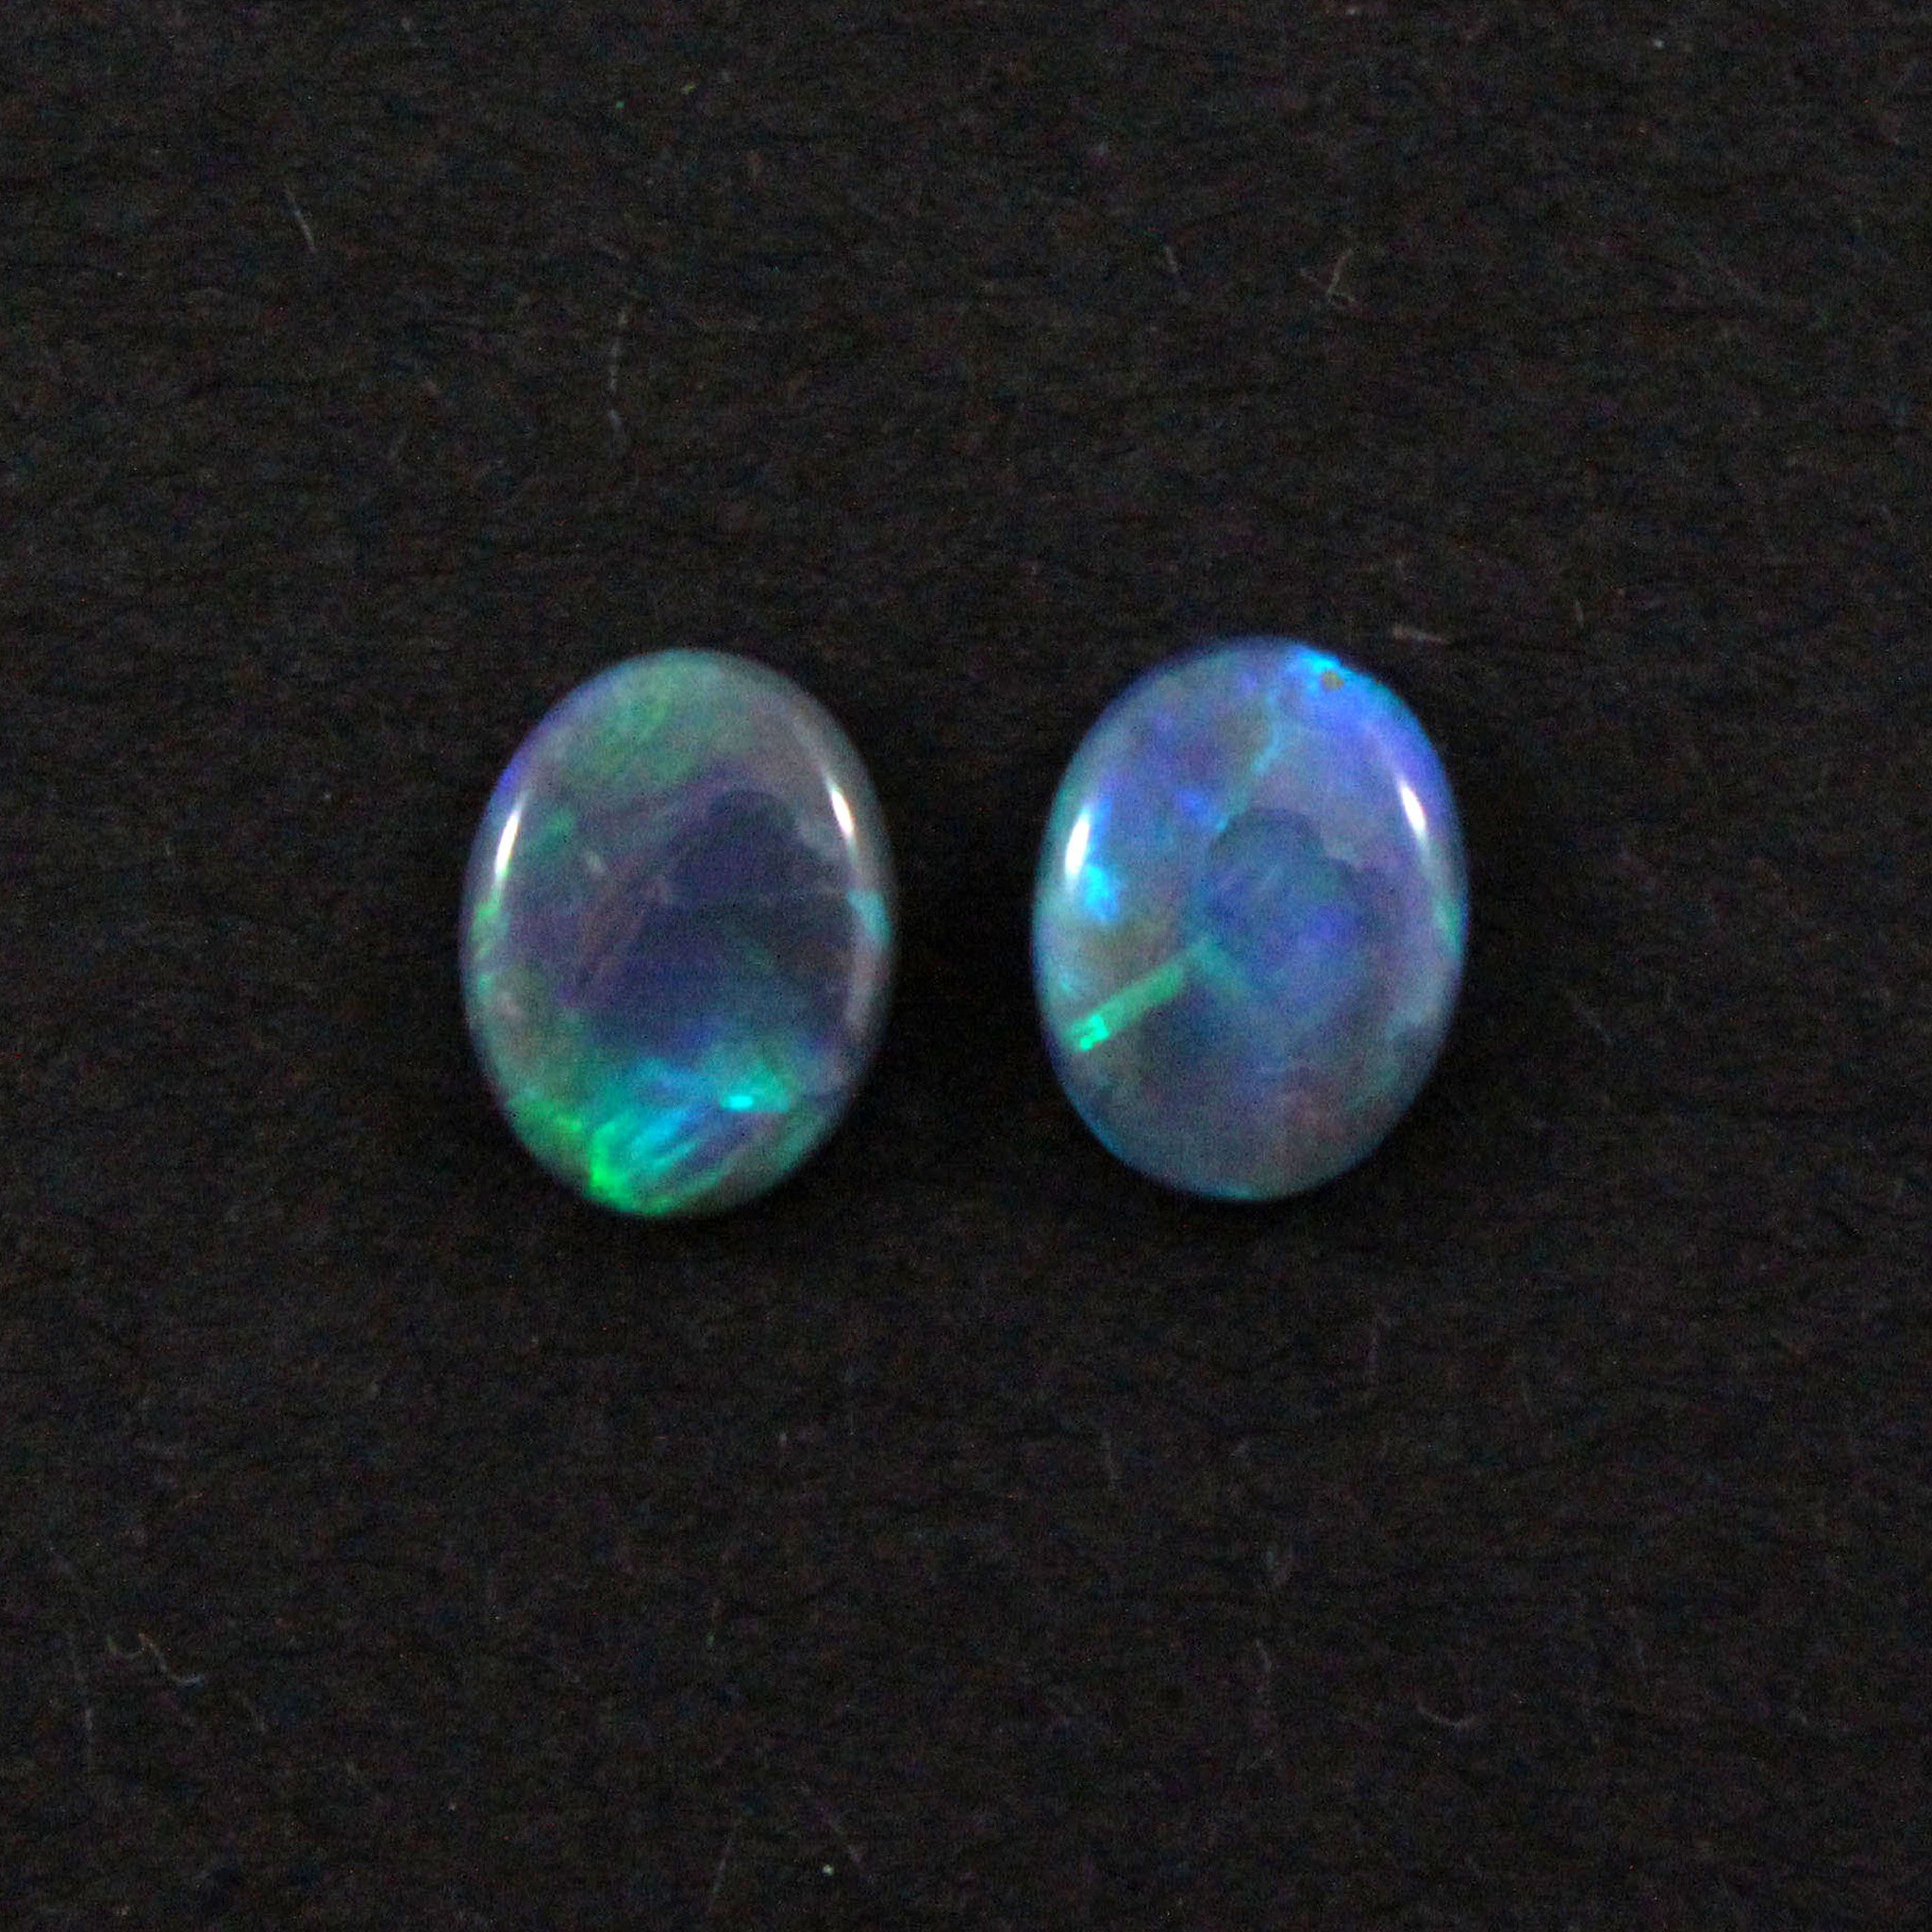 Australian black opal matched pair 1.68 carat total loose gemstone - Purchase only with custom order - Sarah Hughes - 1